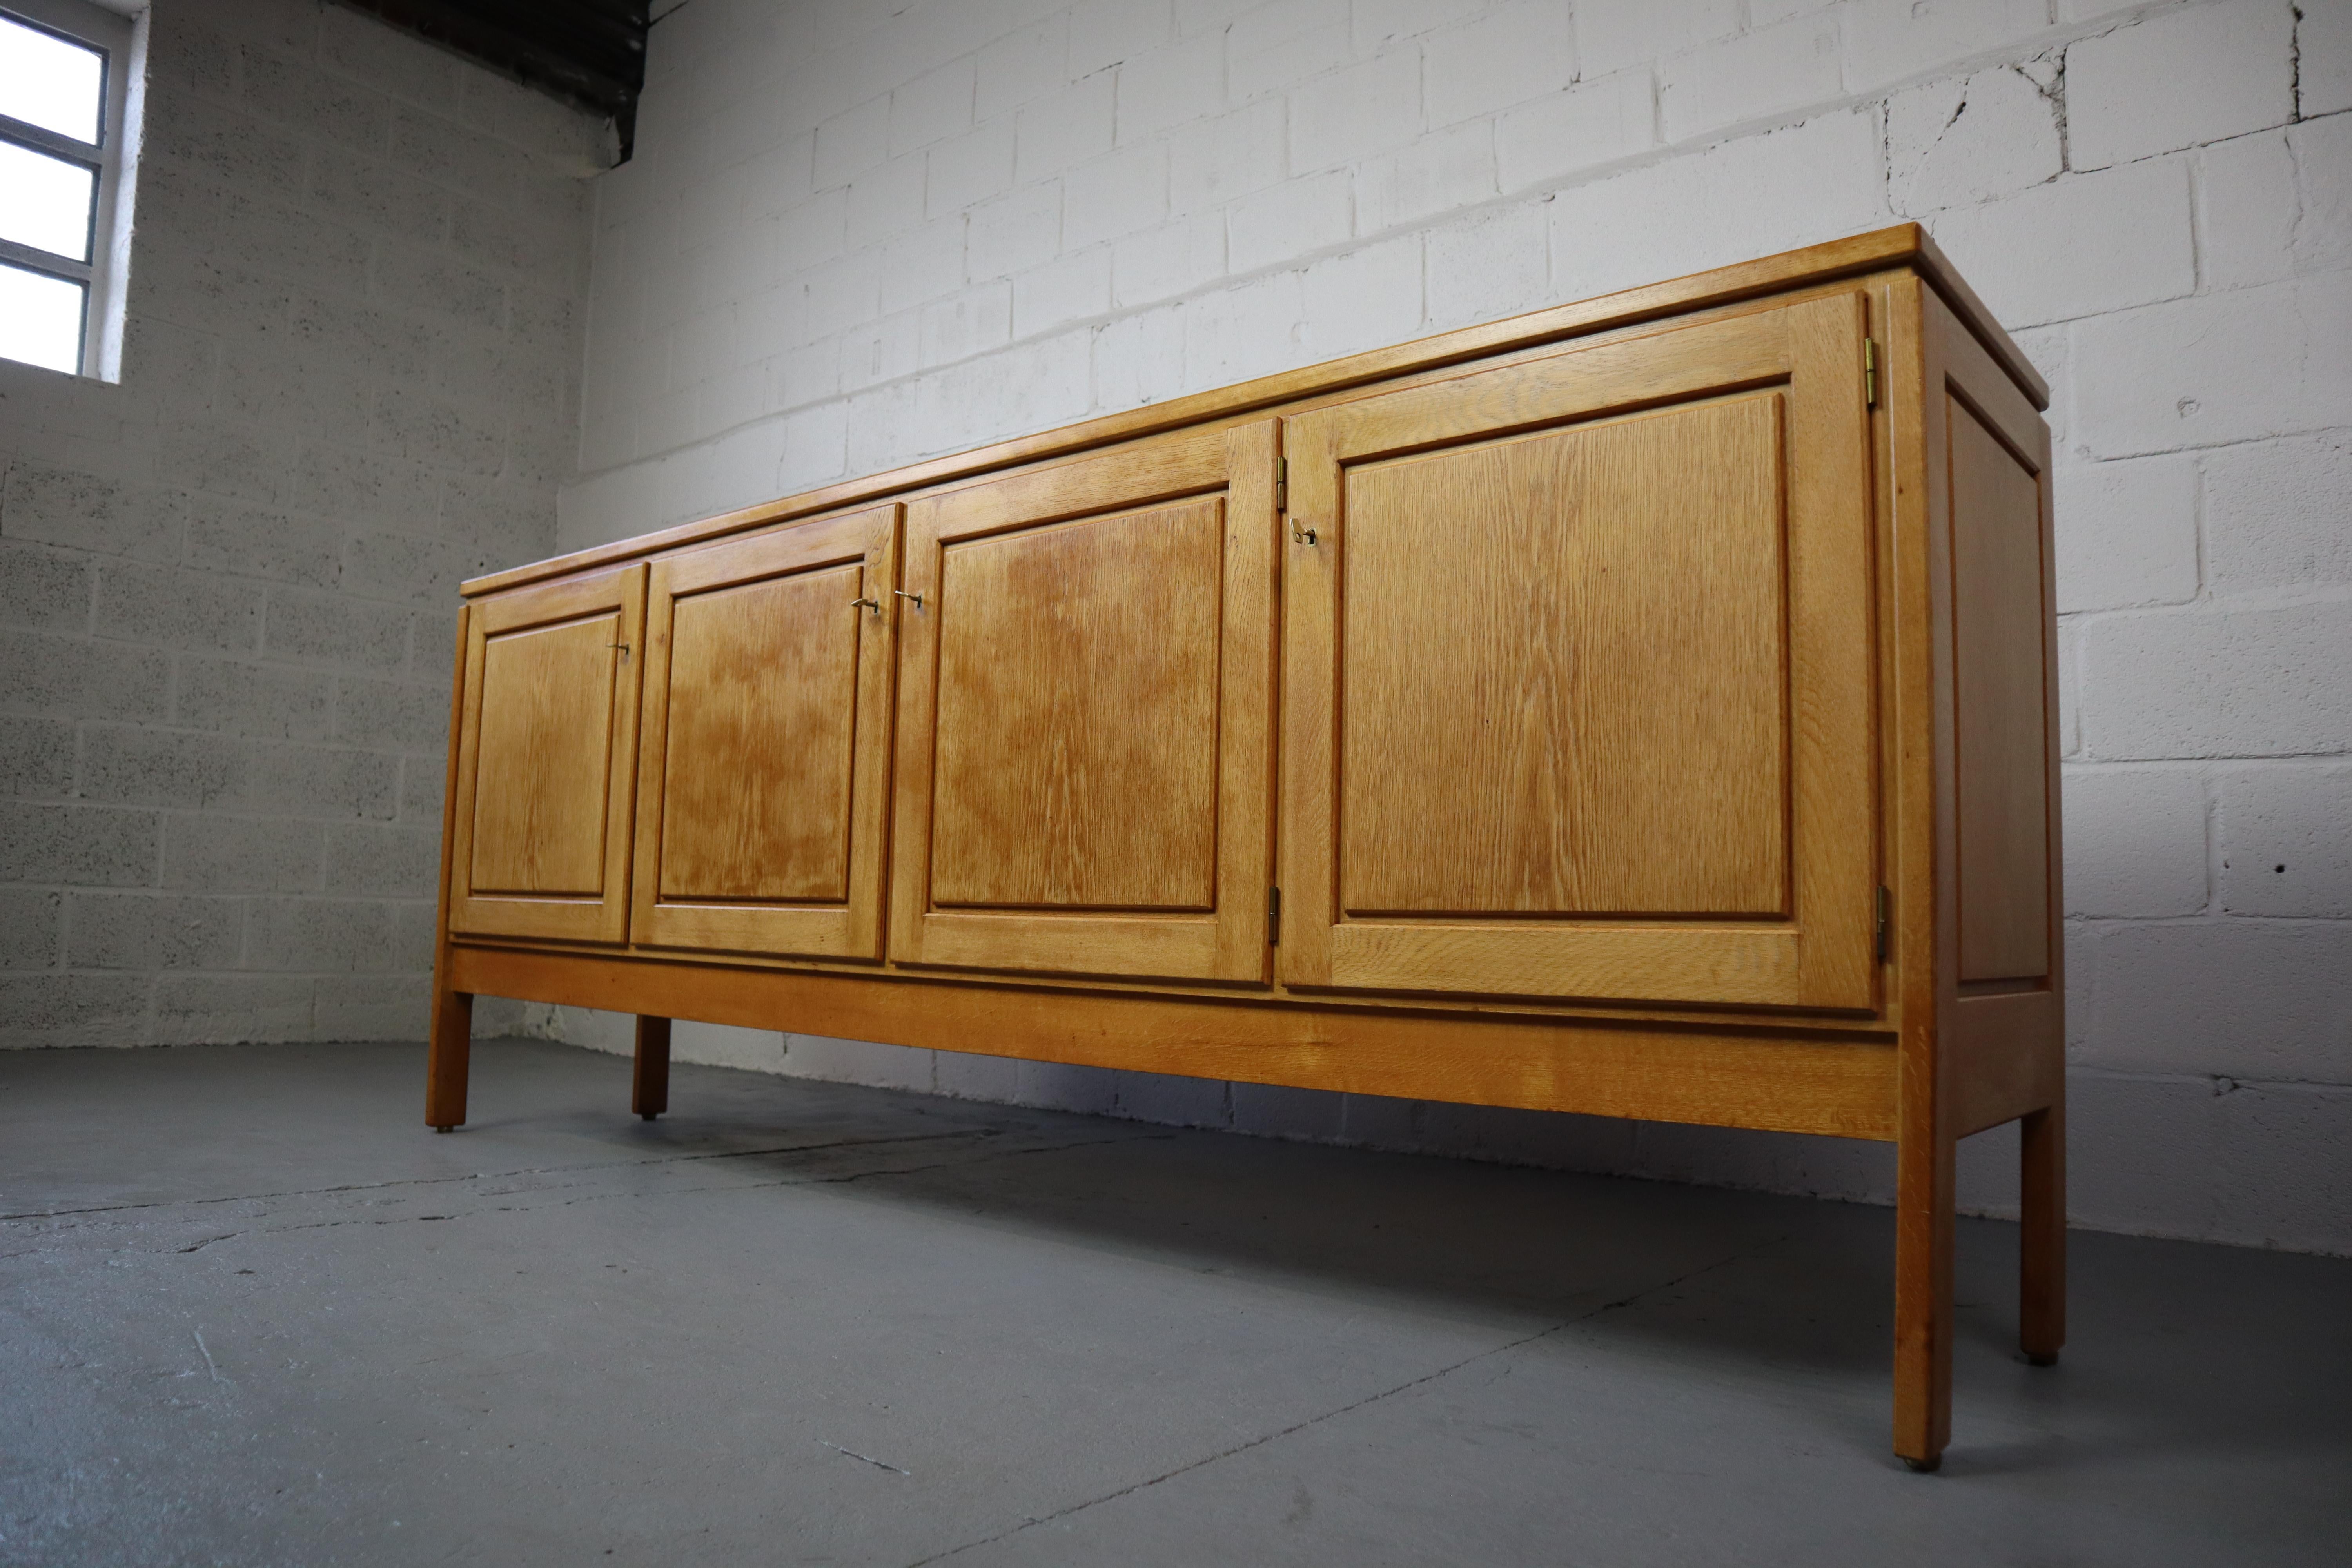 Oak sideboard by Jos De Mey for Van den Berghe-Pauvers, 1970s.
This sideboard features four large doors and five drawers.
Each door opens and closes with a brass key. The cabinet is labelled on the inside as shown in photos. All together a